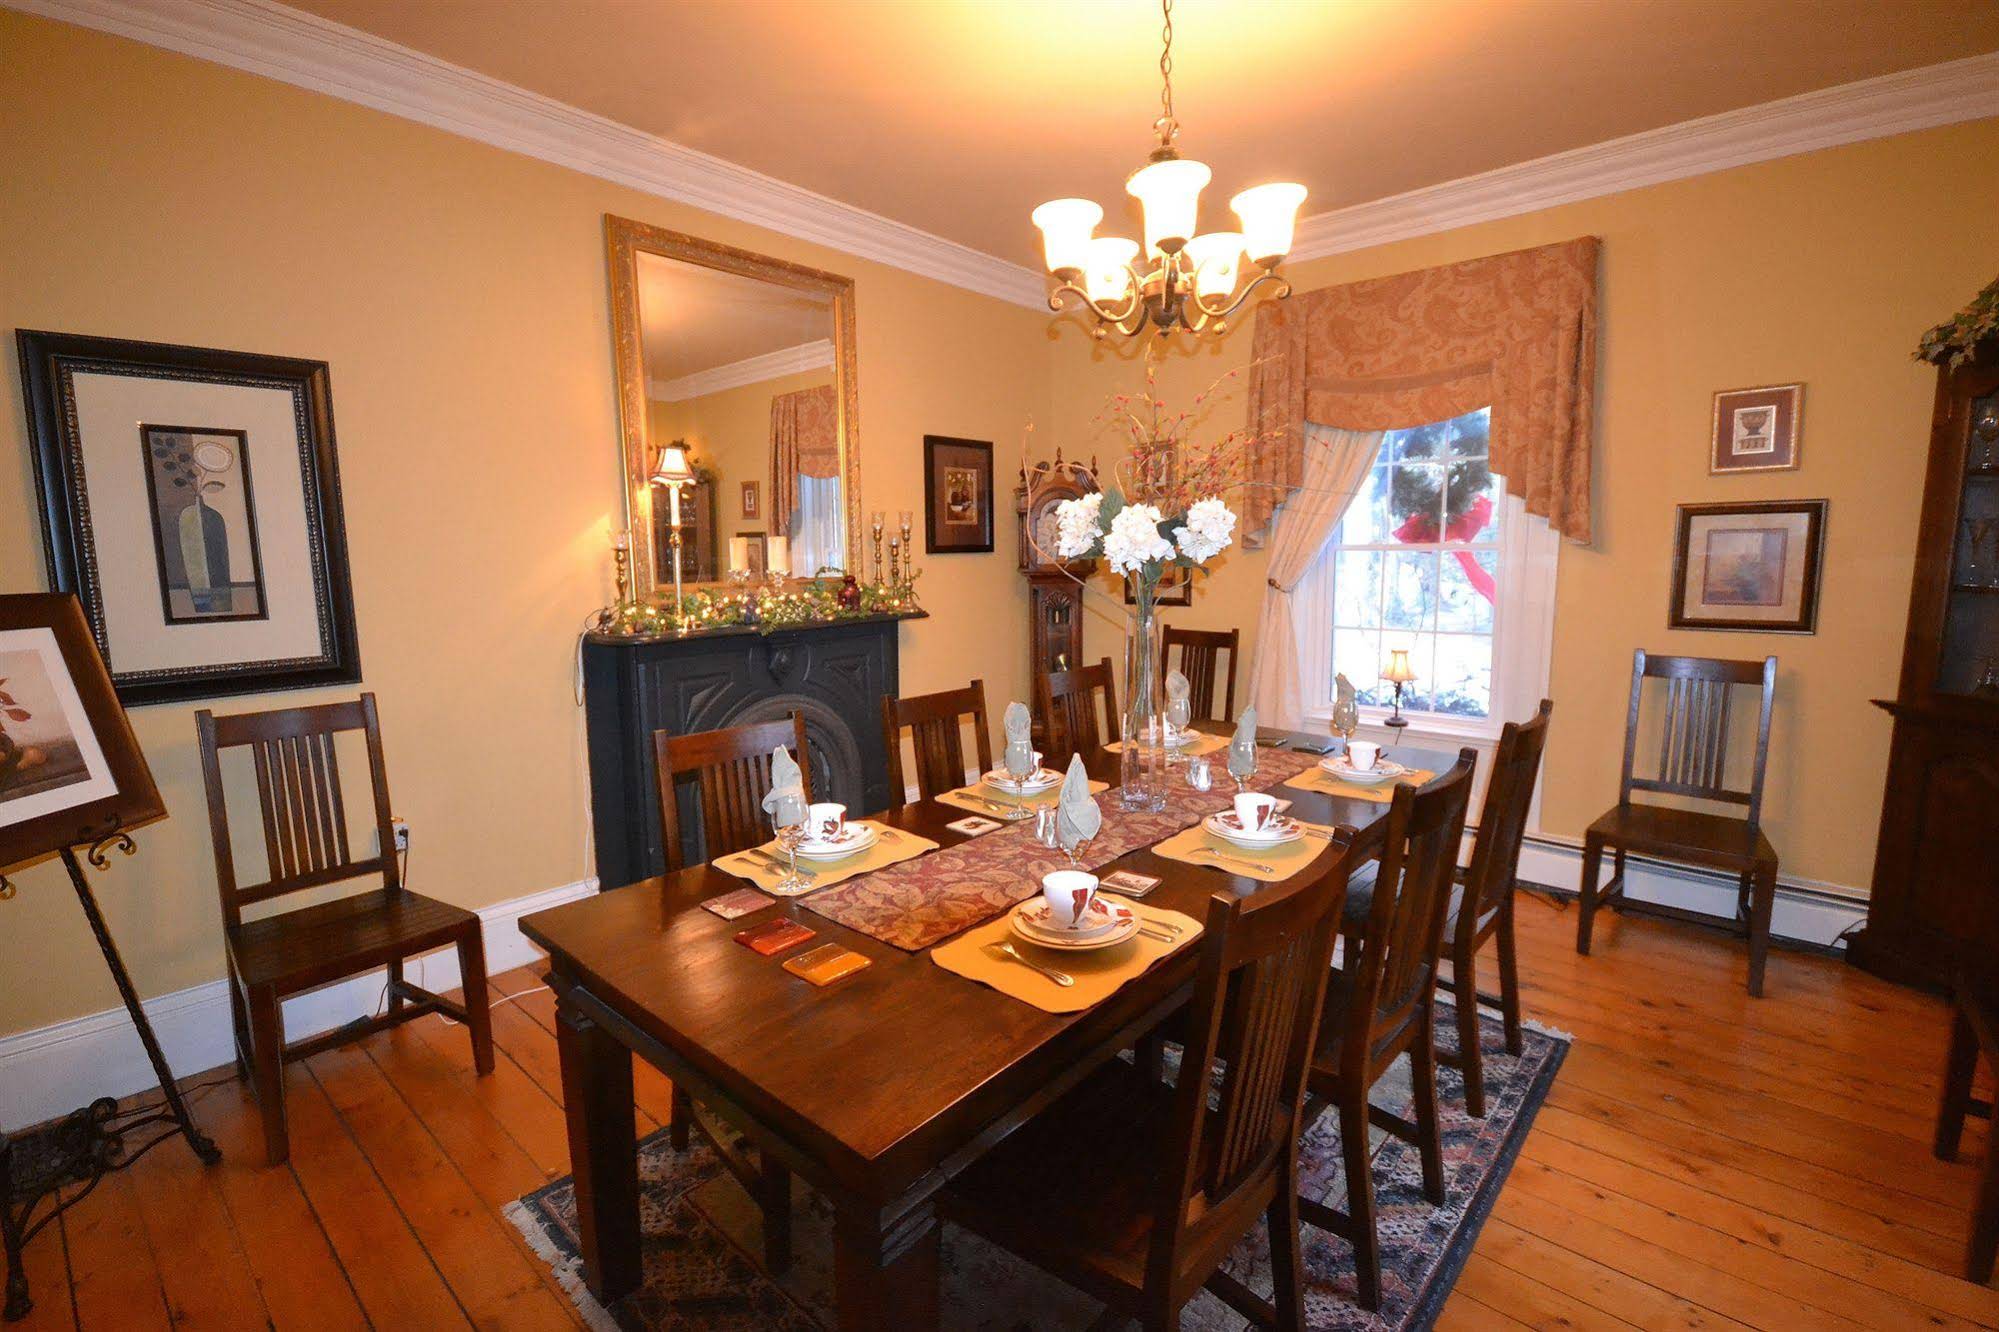 The Briarwood Bed & Breakfast